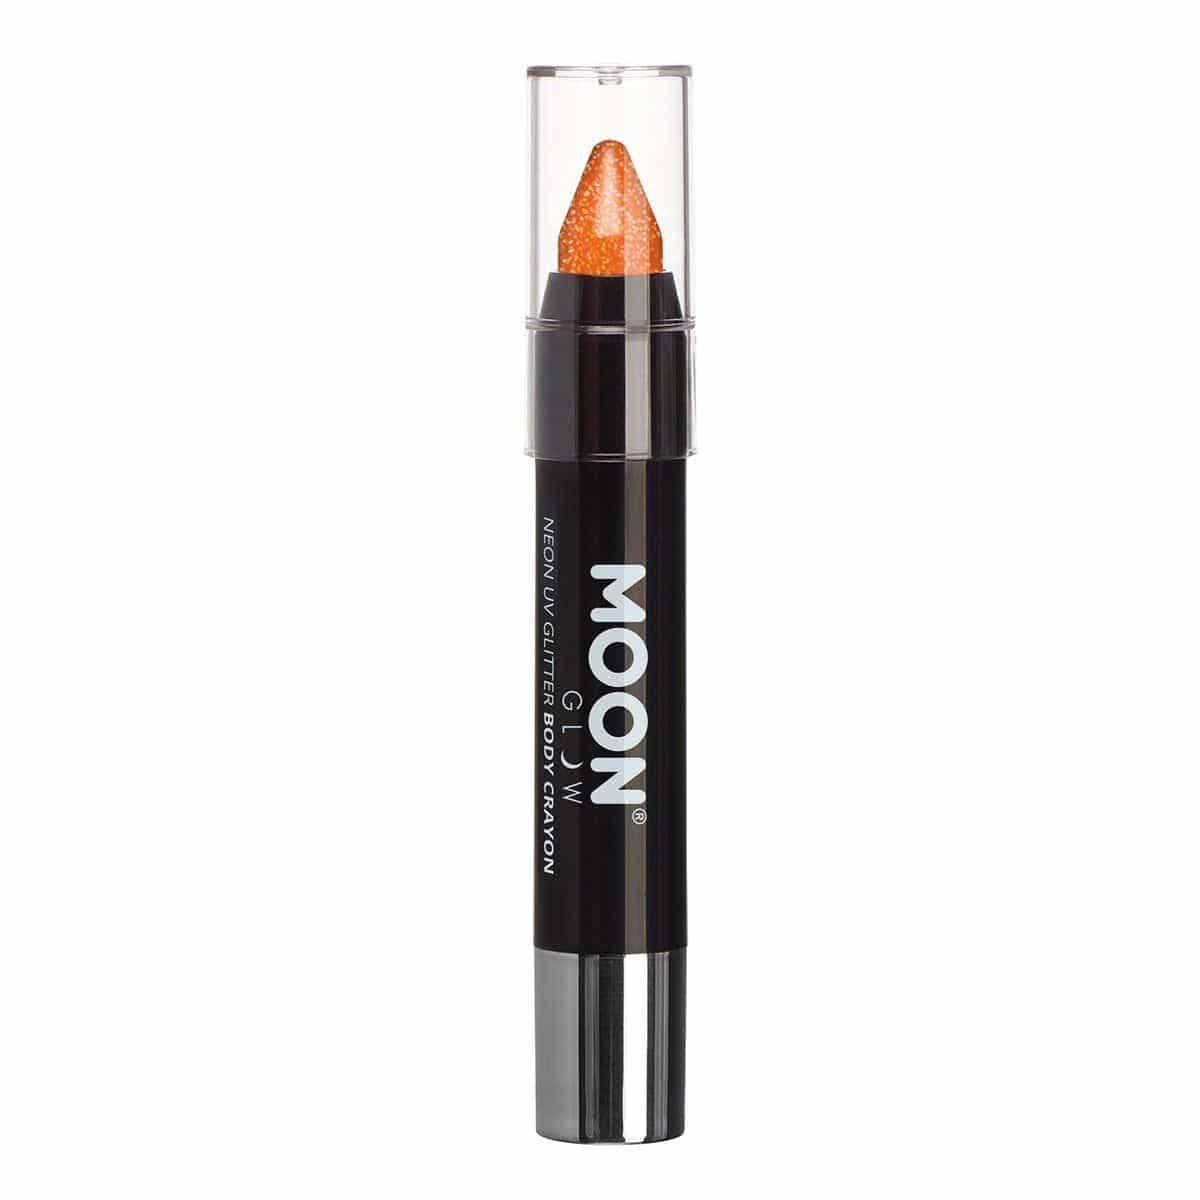 Buy Costume Accessories Moon orange glitter UV face & body crayon sold at Party Expert